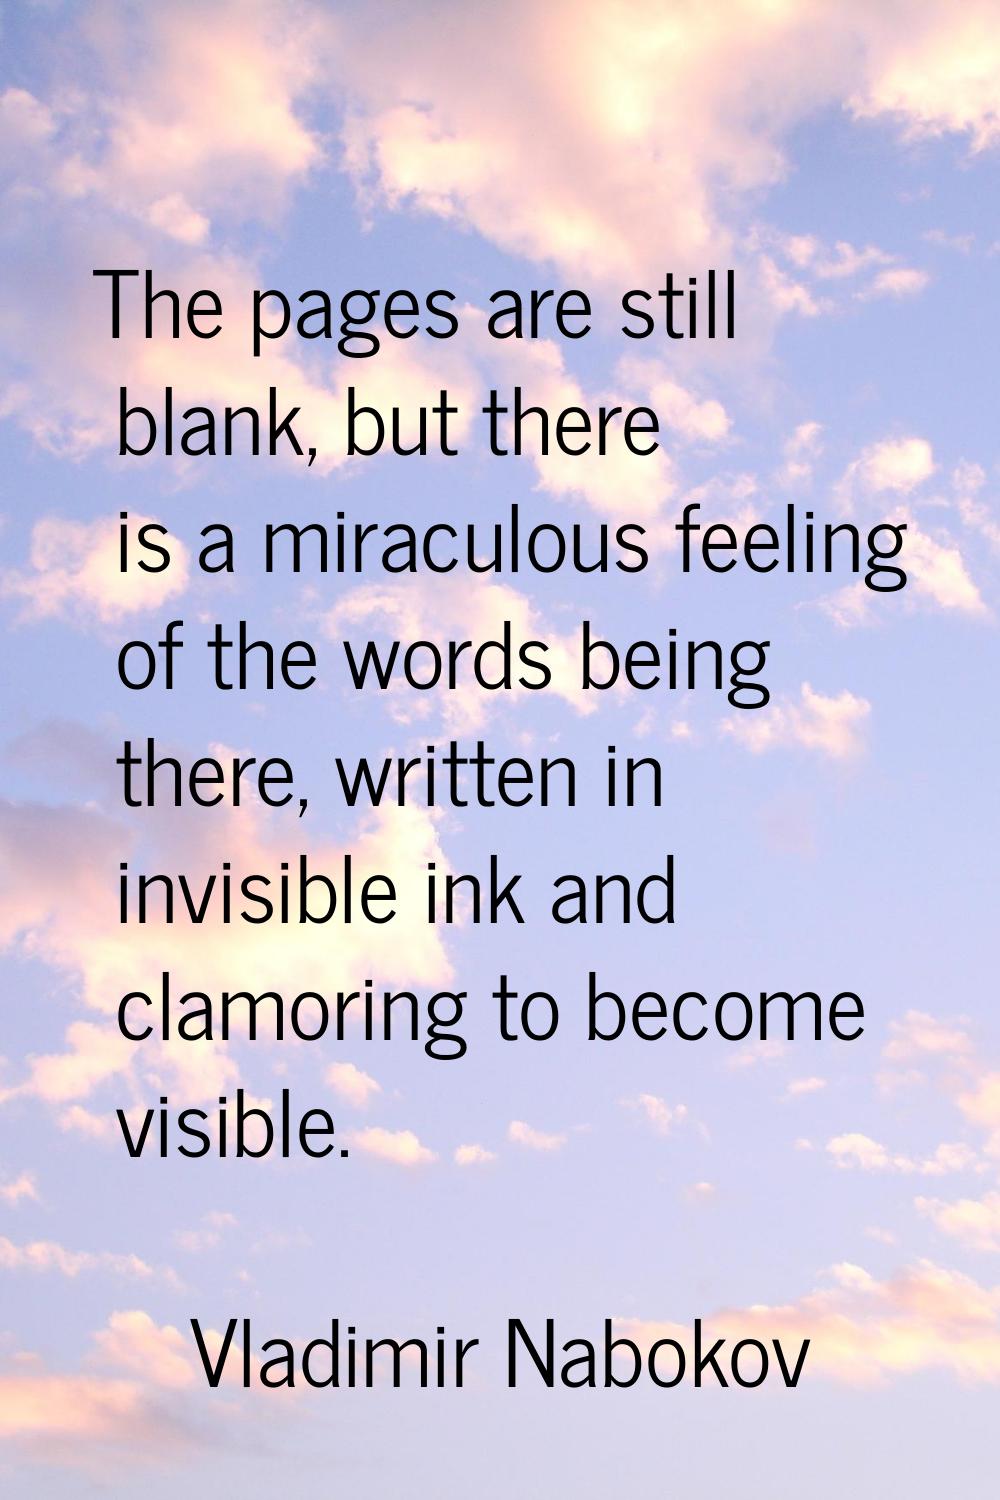 The pages are still blank, but there is a miraculous feeling of the words being there, written in i